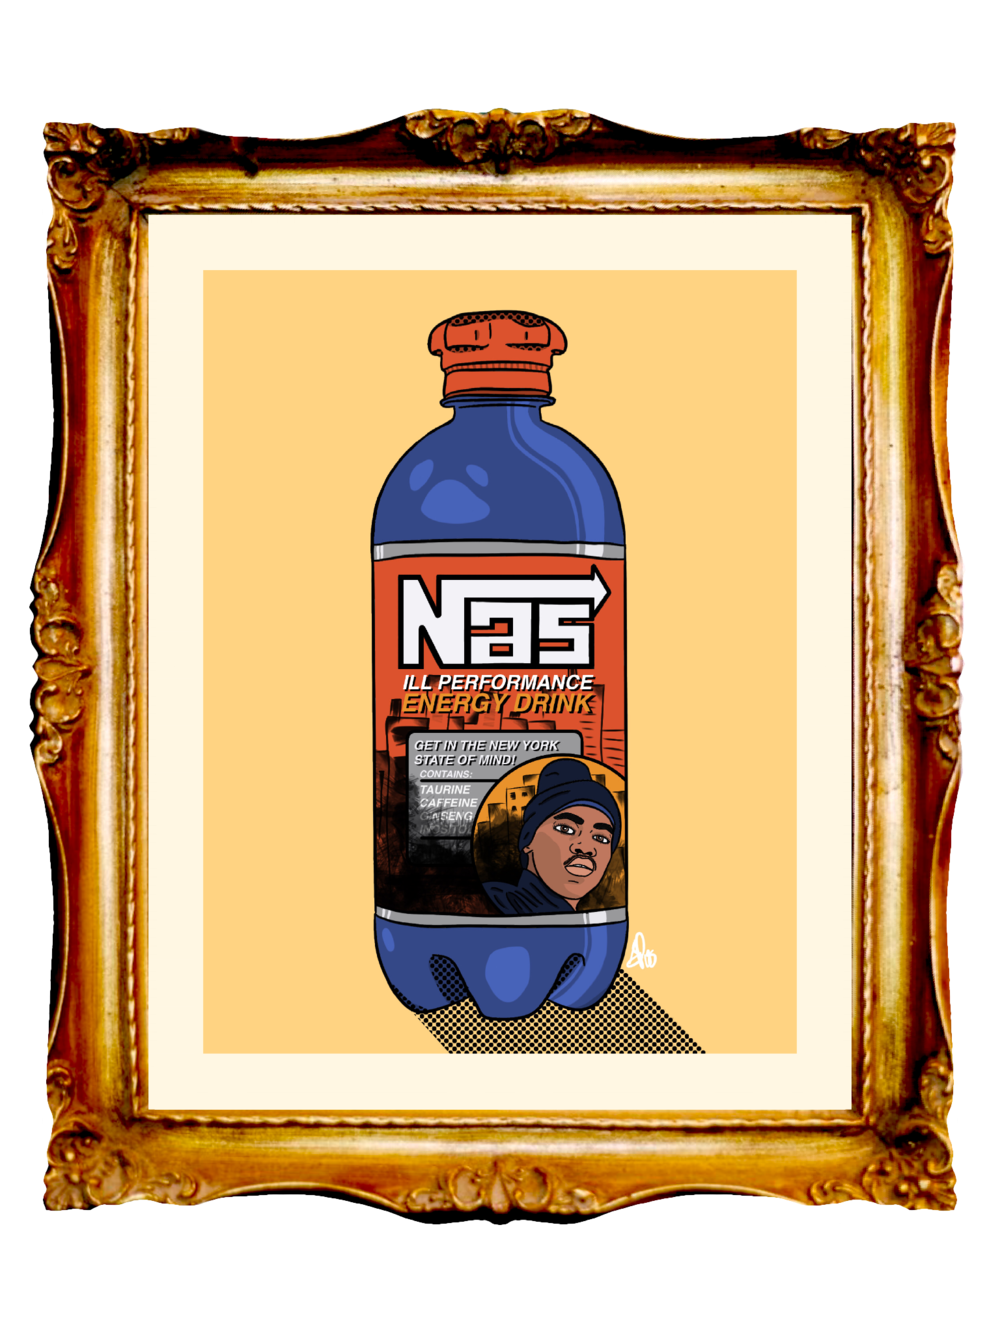 NAS ENERGY DRINK - Limited 24" x 18" Poster by BOYSDONTDRAW